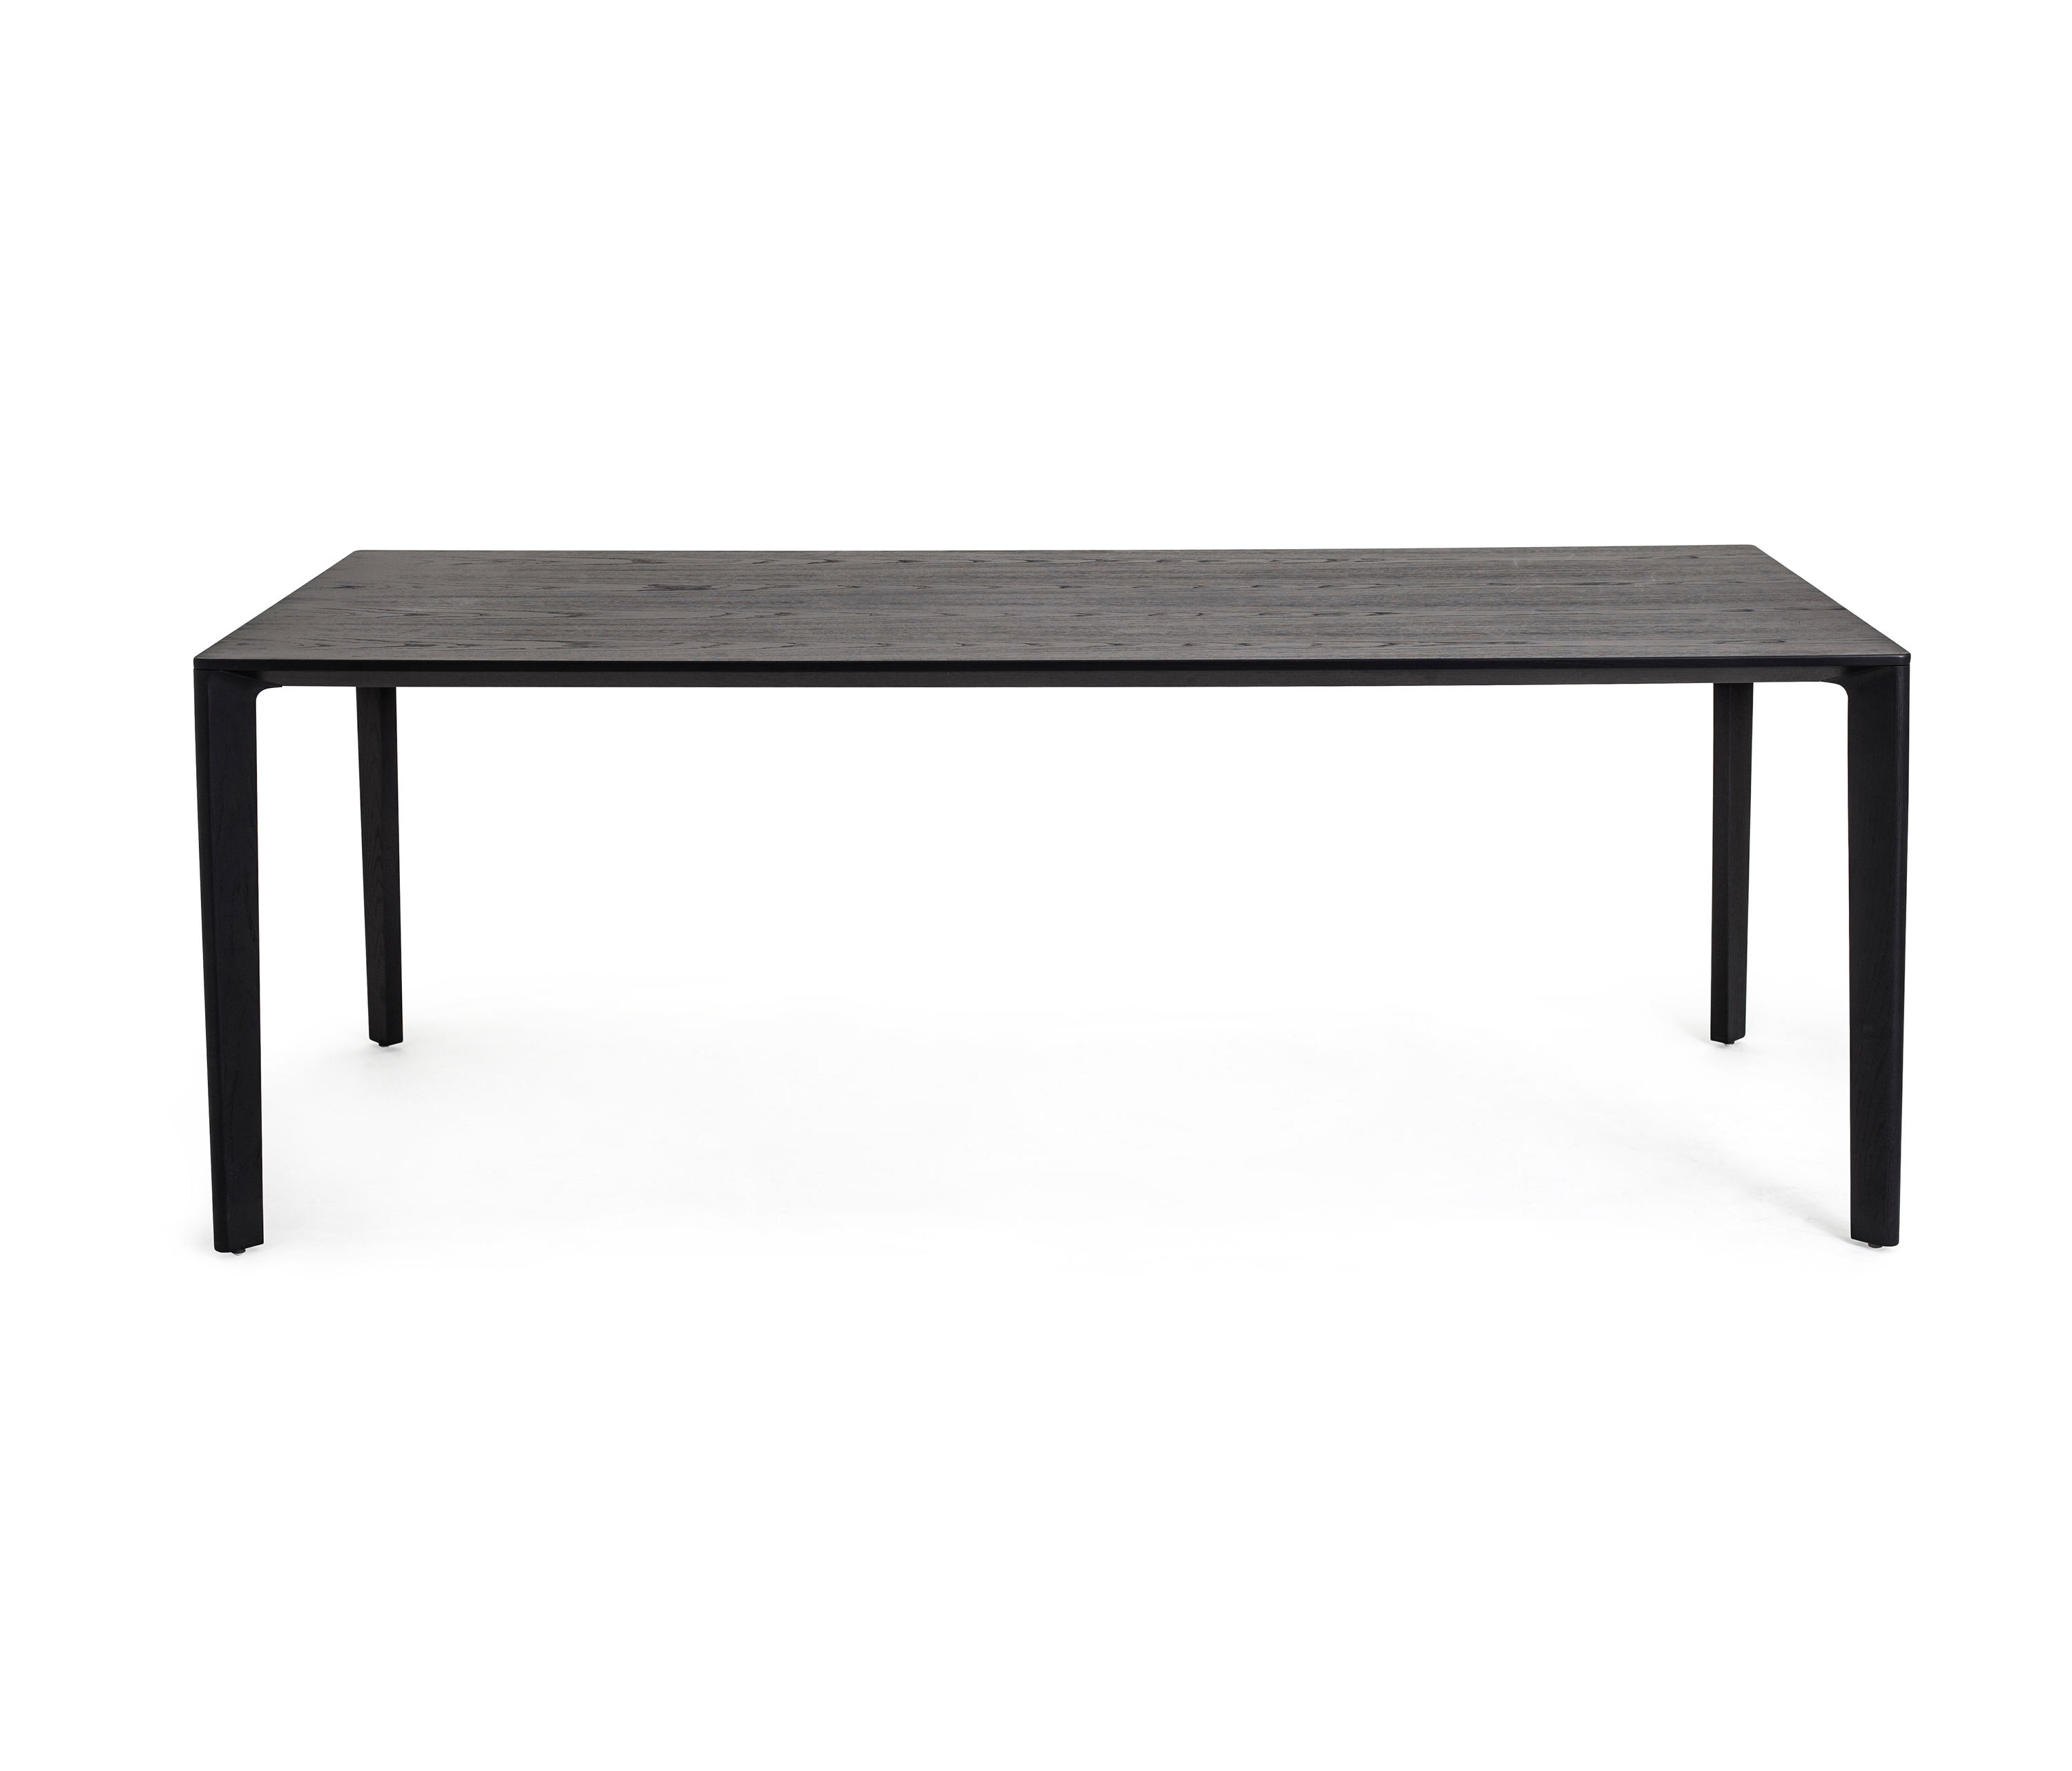 Taylor Dining Table & designer furniture | Architonic